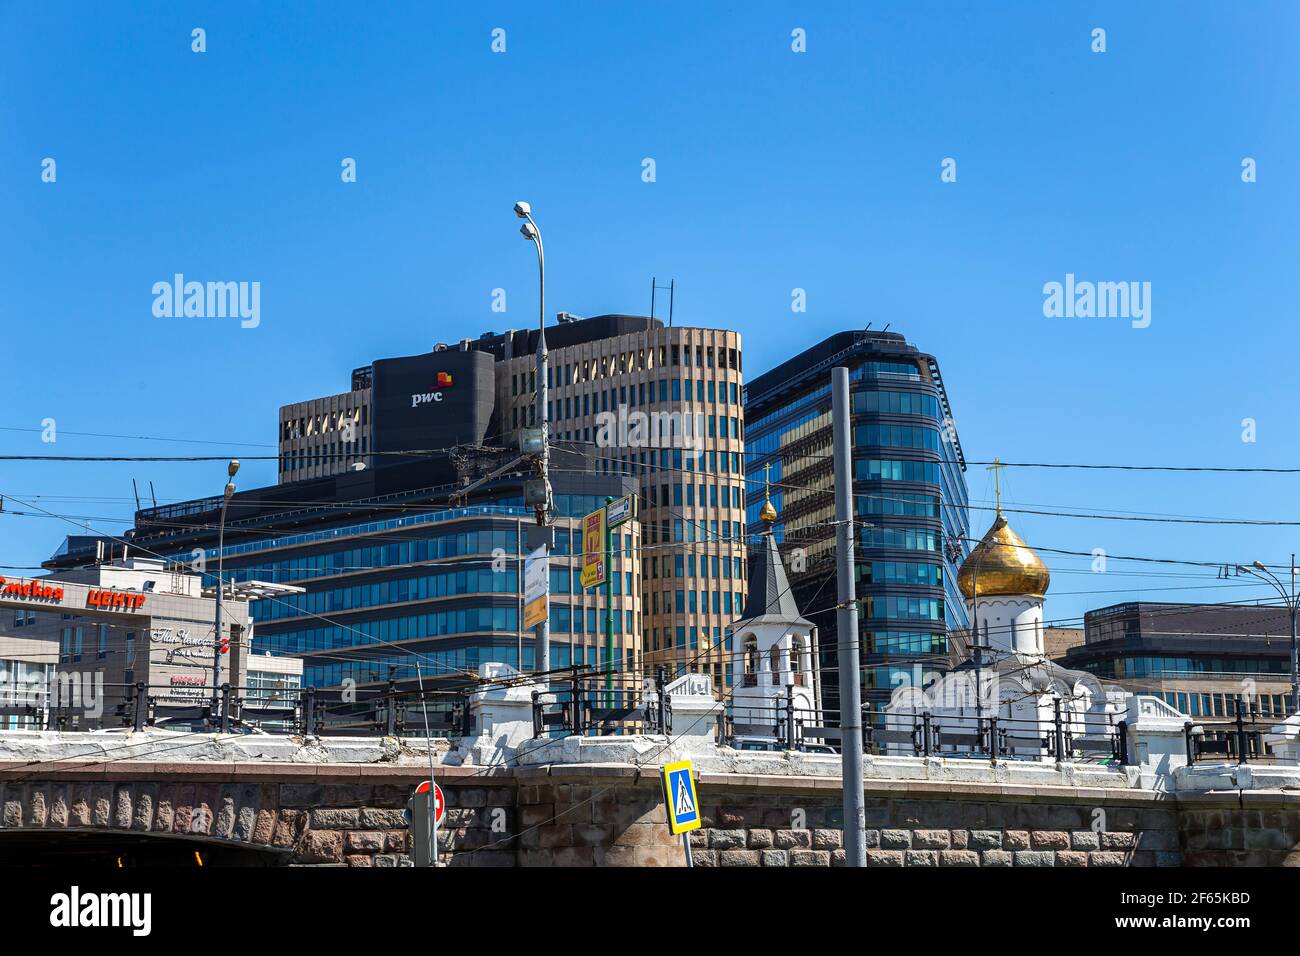 High-rise buildings on Tverskaya Zastava square near Belorussky railway station in the center of Moscow, Russia Stock Photo